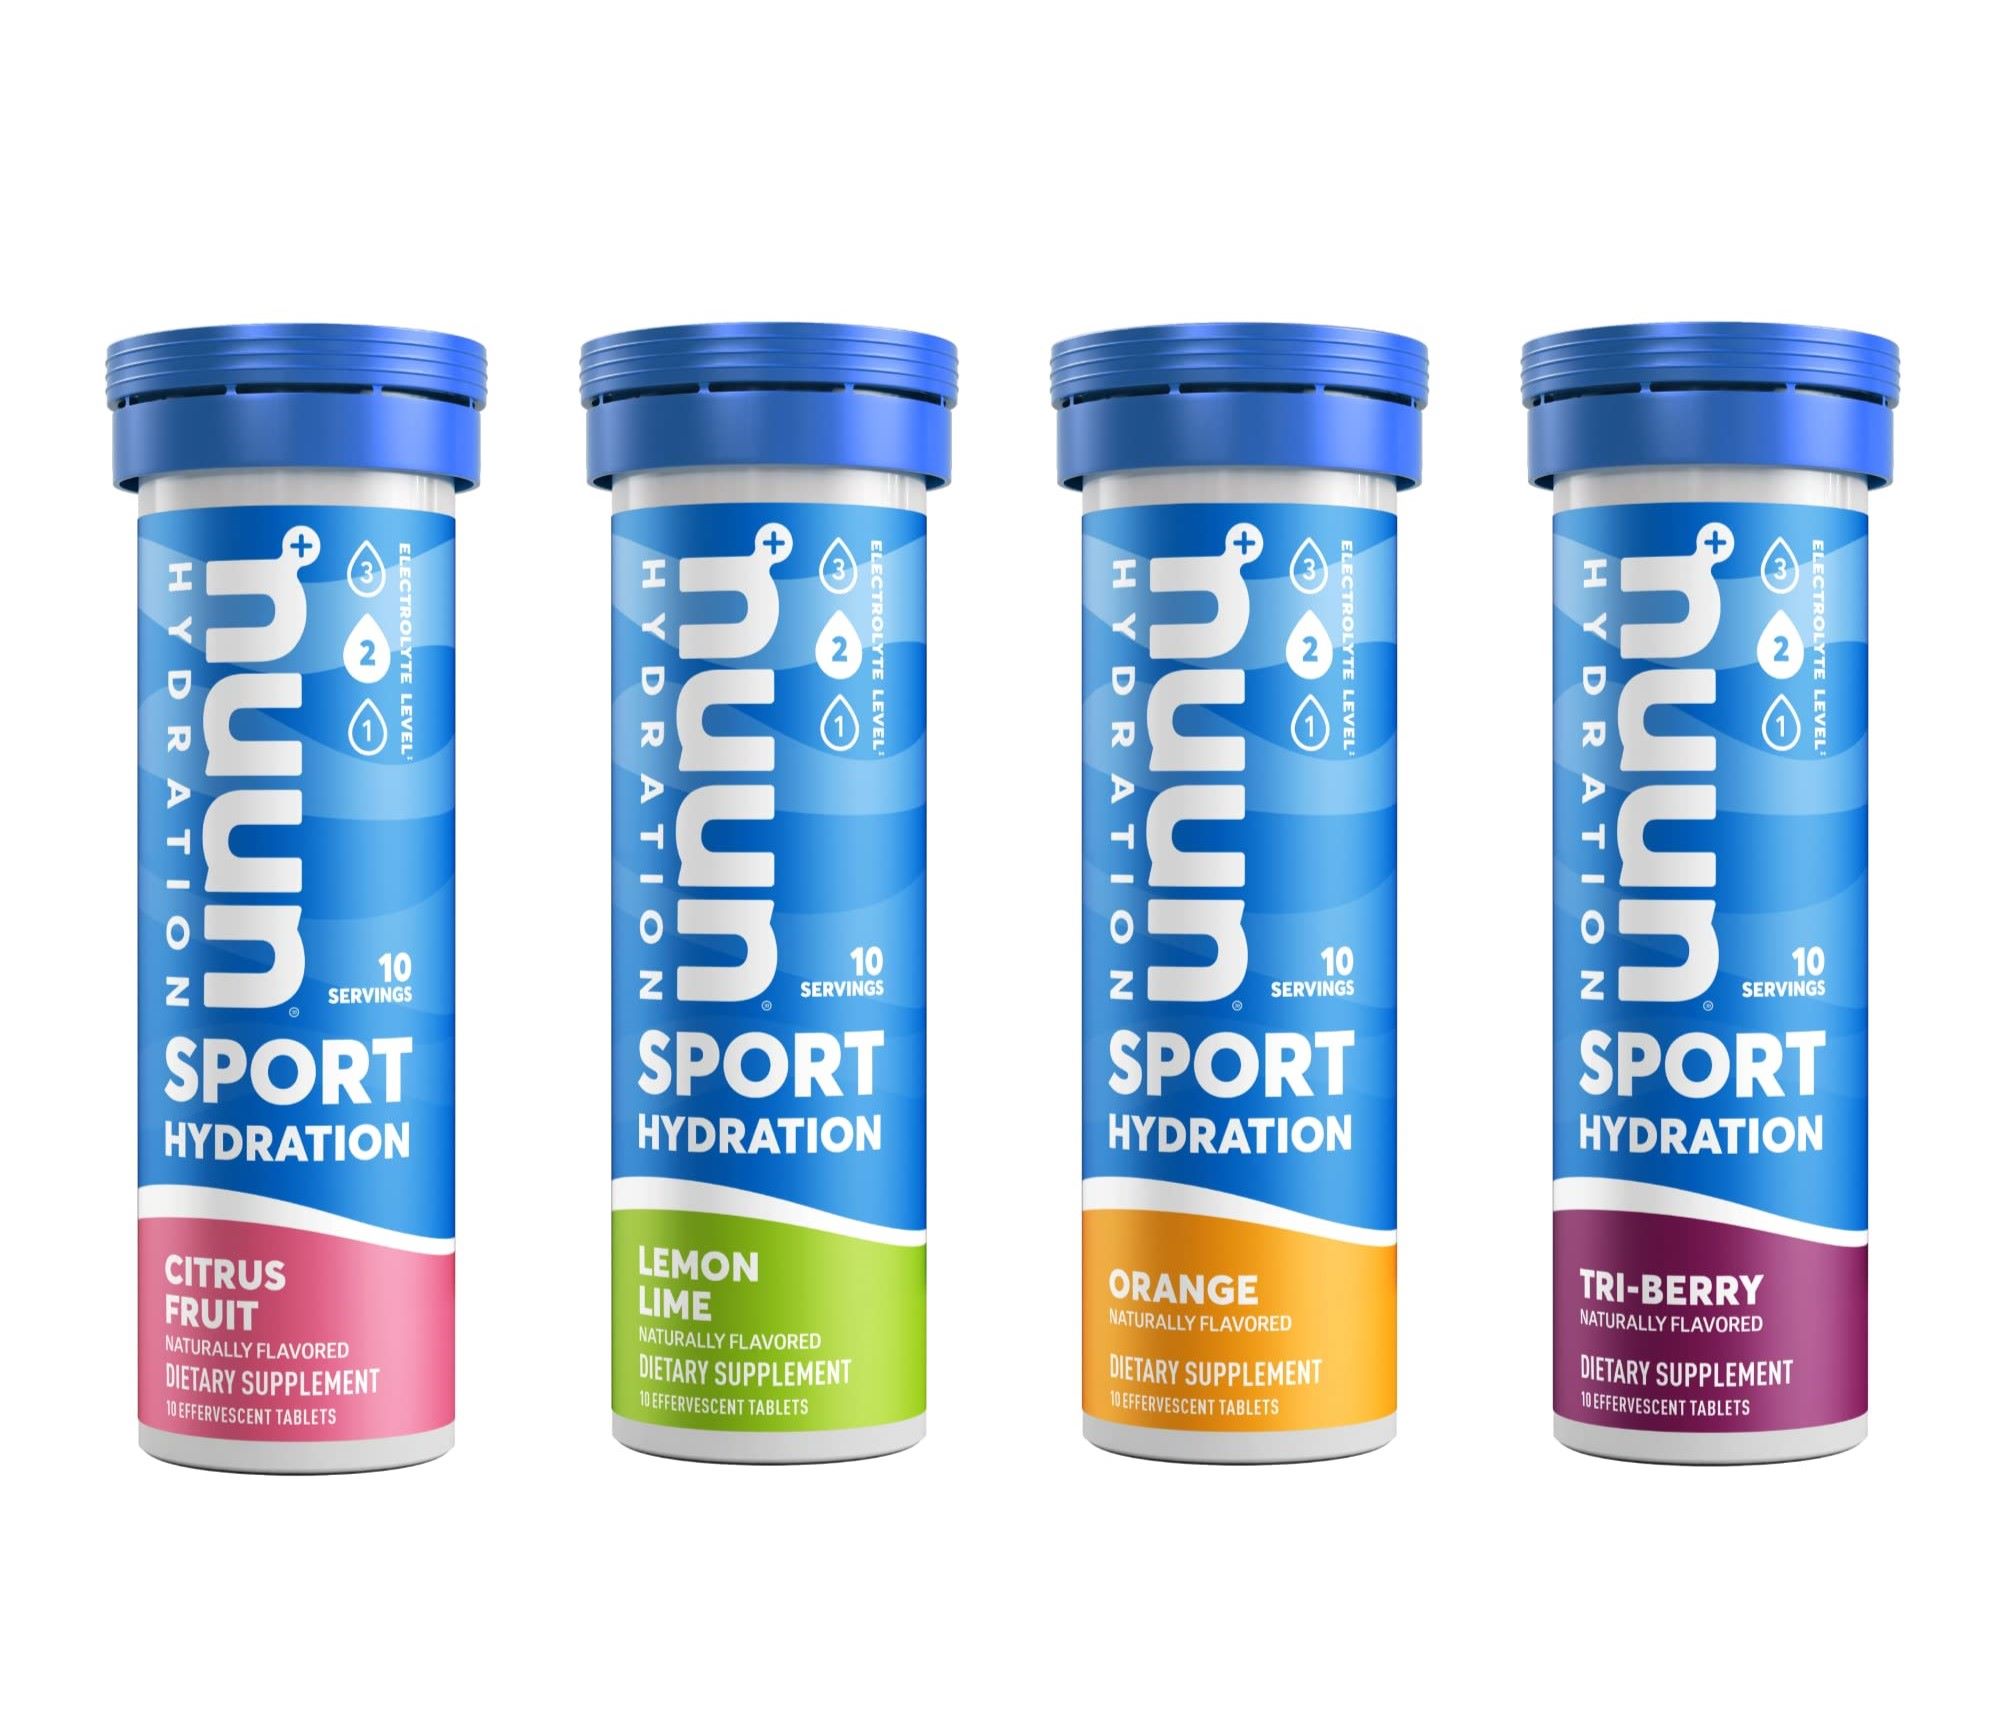 18-nuun-hydration-nutrition-facts